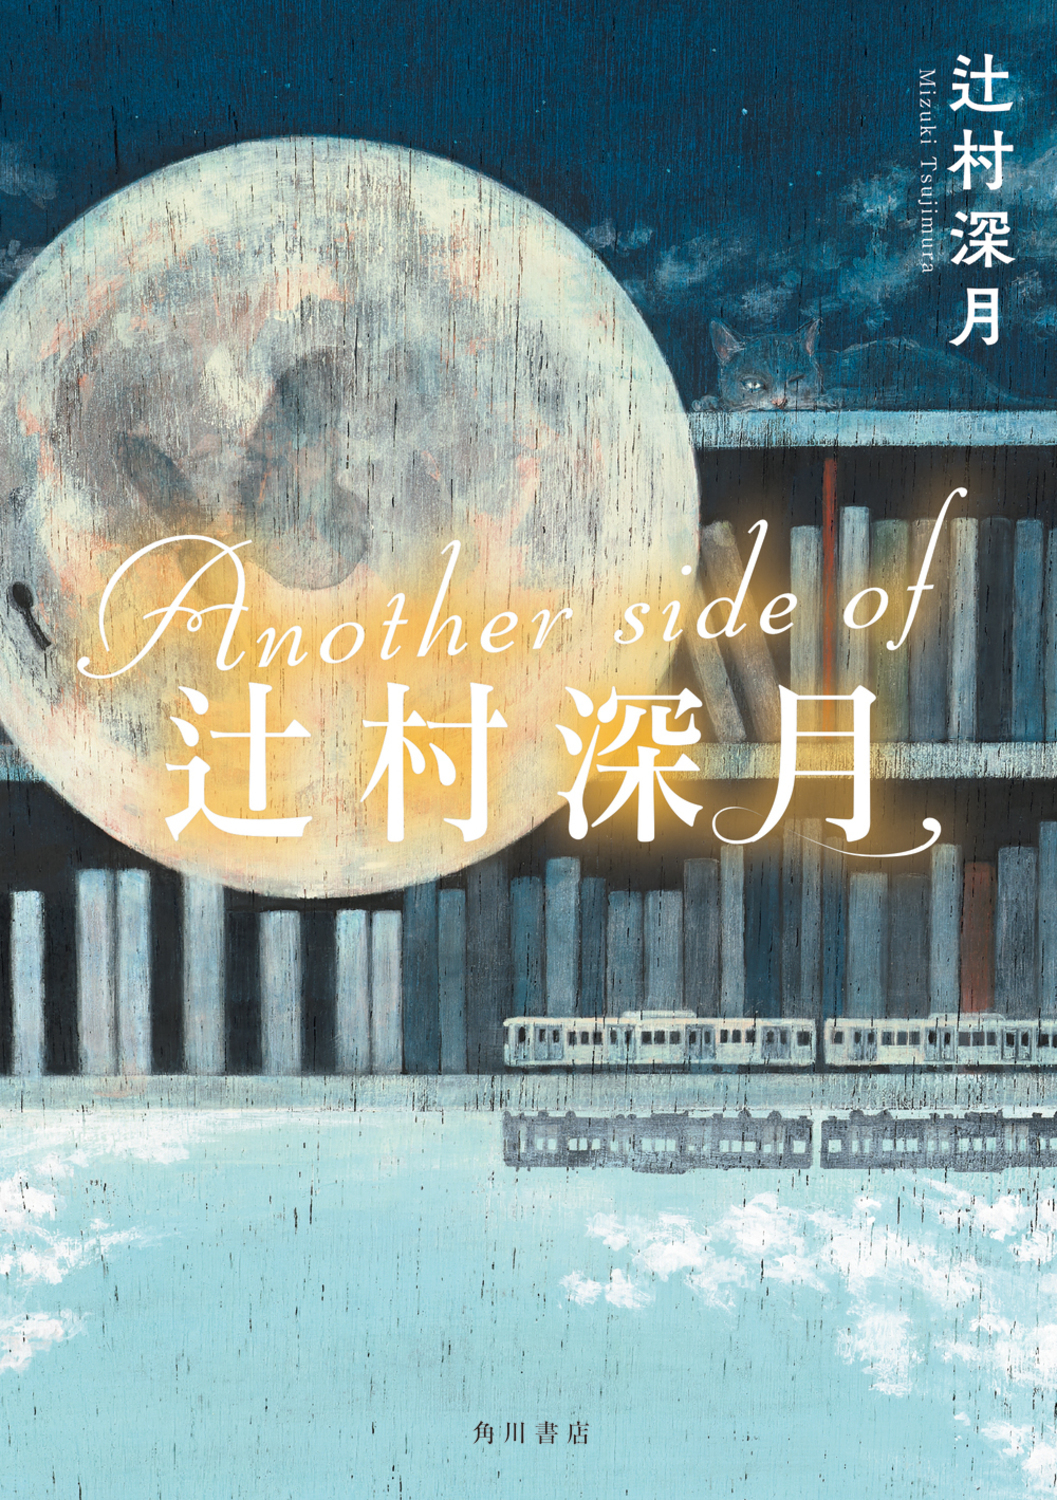 『Another side of 辻村深月』表紙